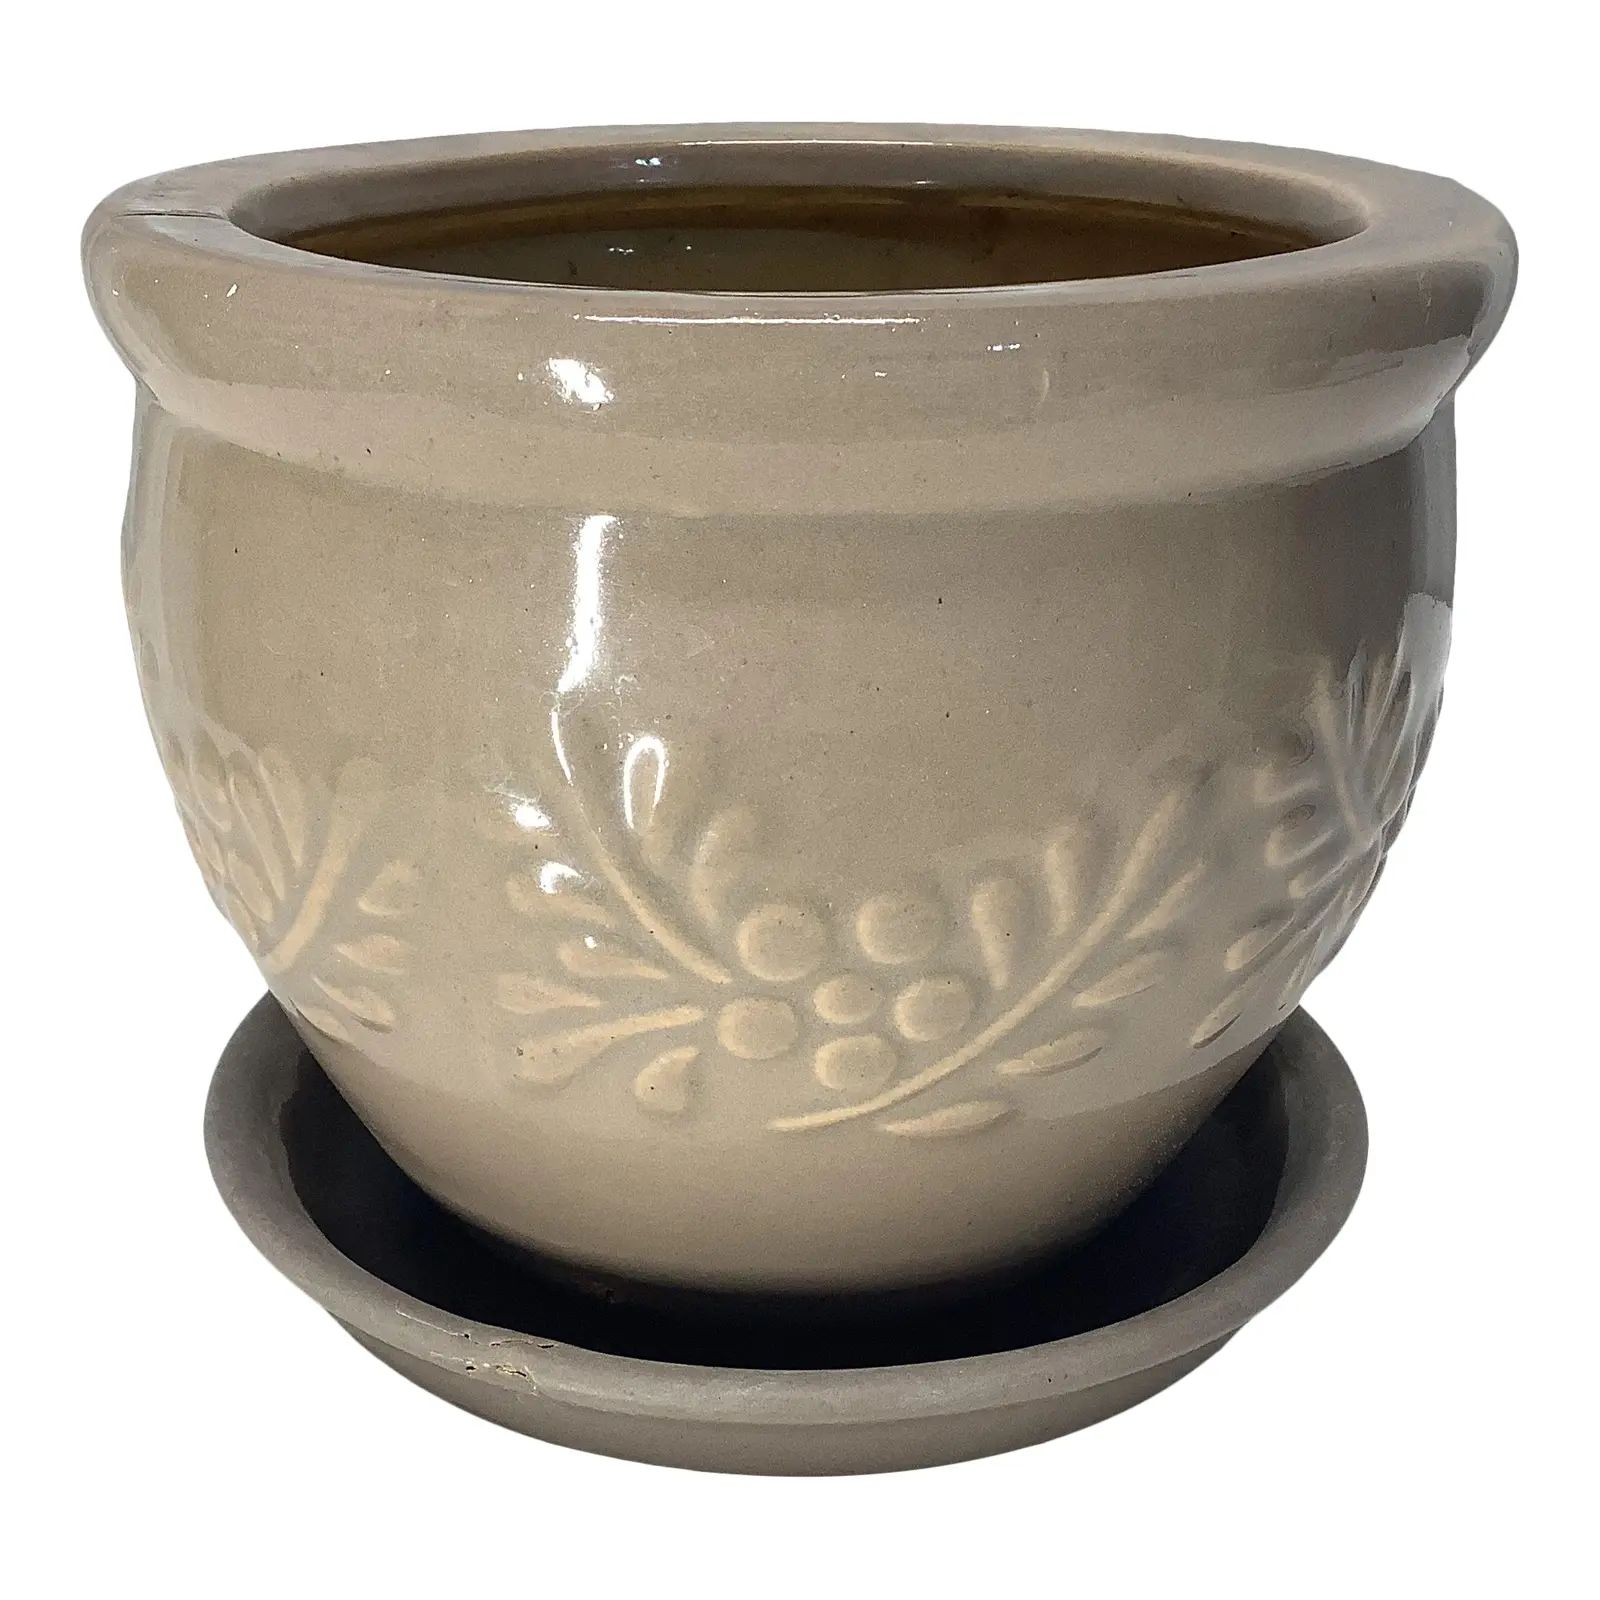 Vintage Ceramic Round Planter With Overflow Plate & Botanical Design in Taupe | Chairish